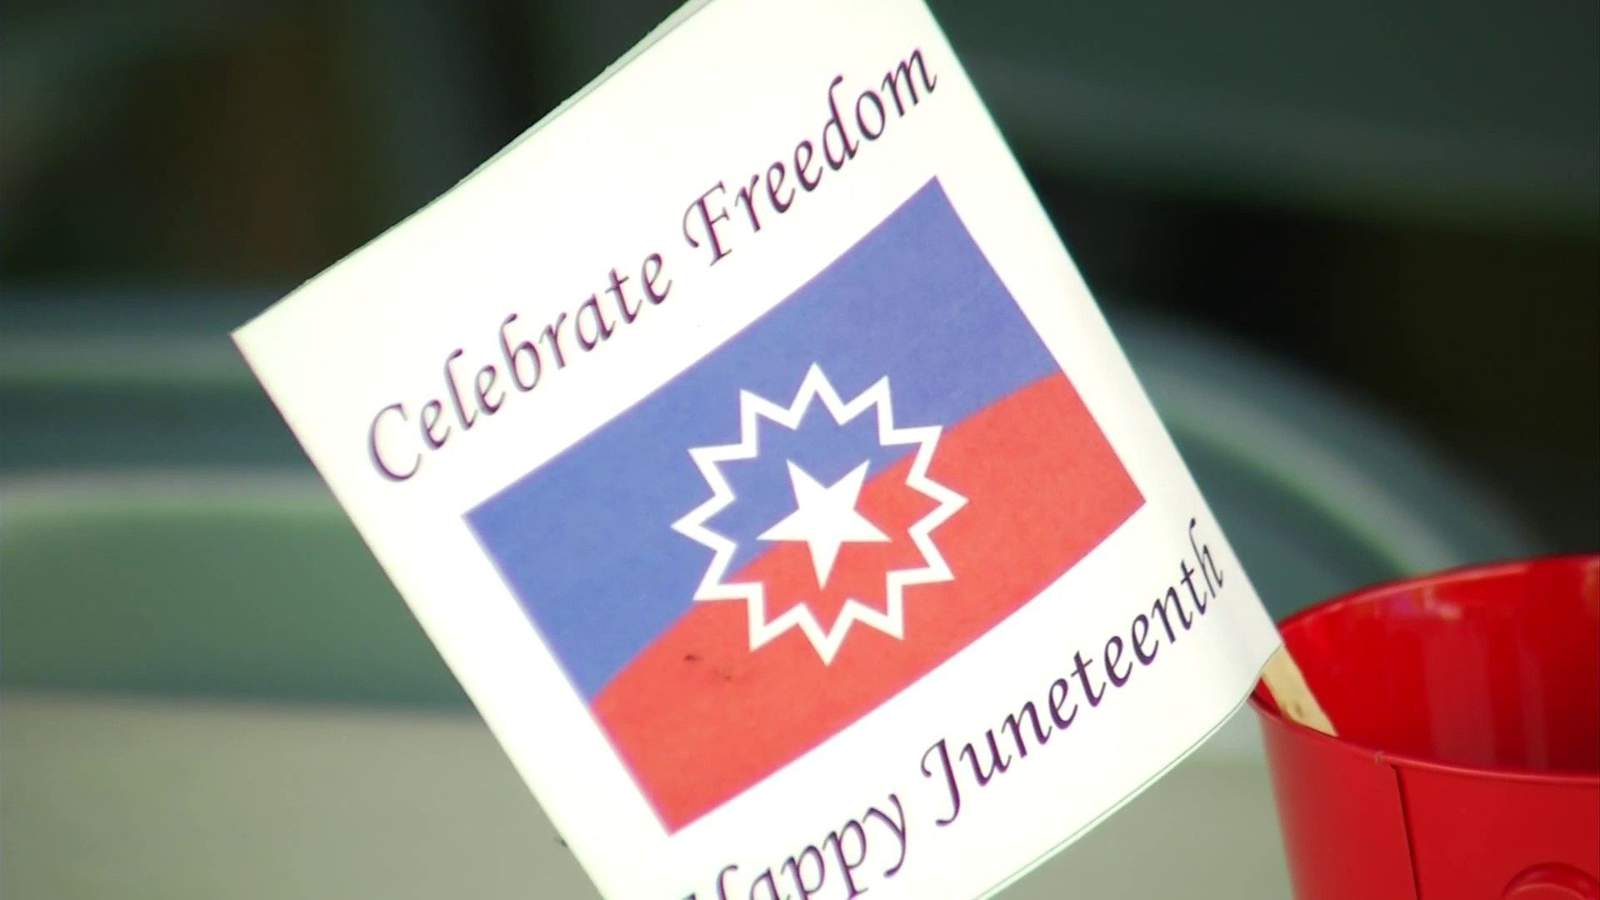 Roanoke City leaders support governor’s goal of making Juneteenth a state holiday